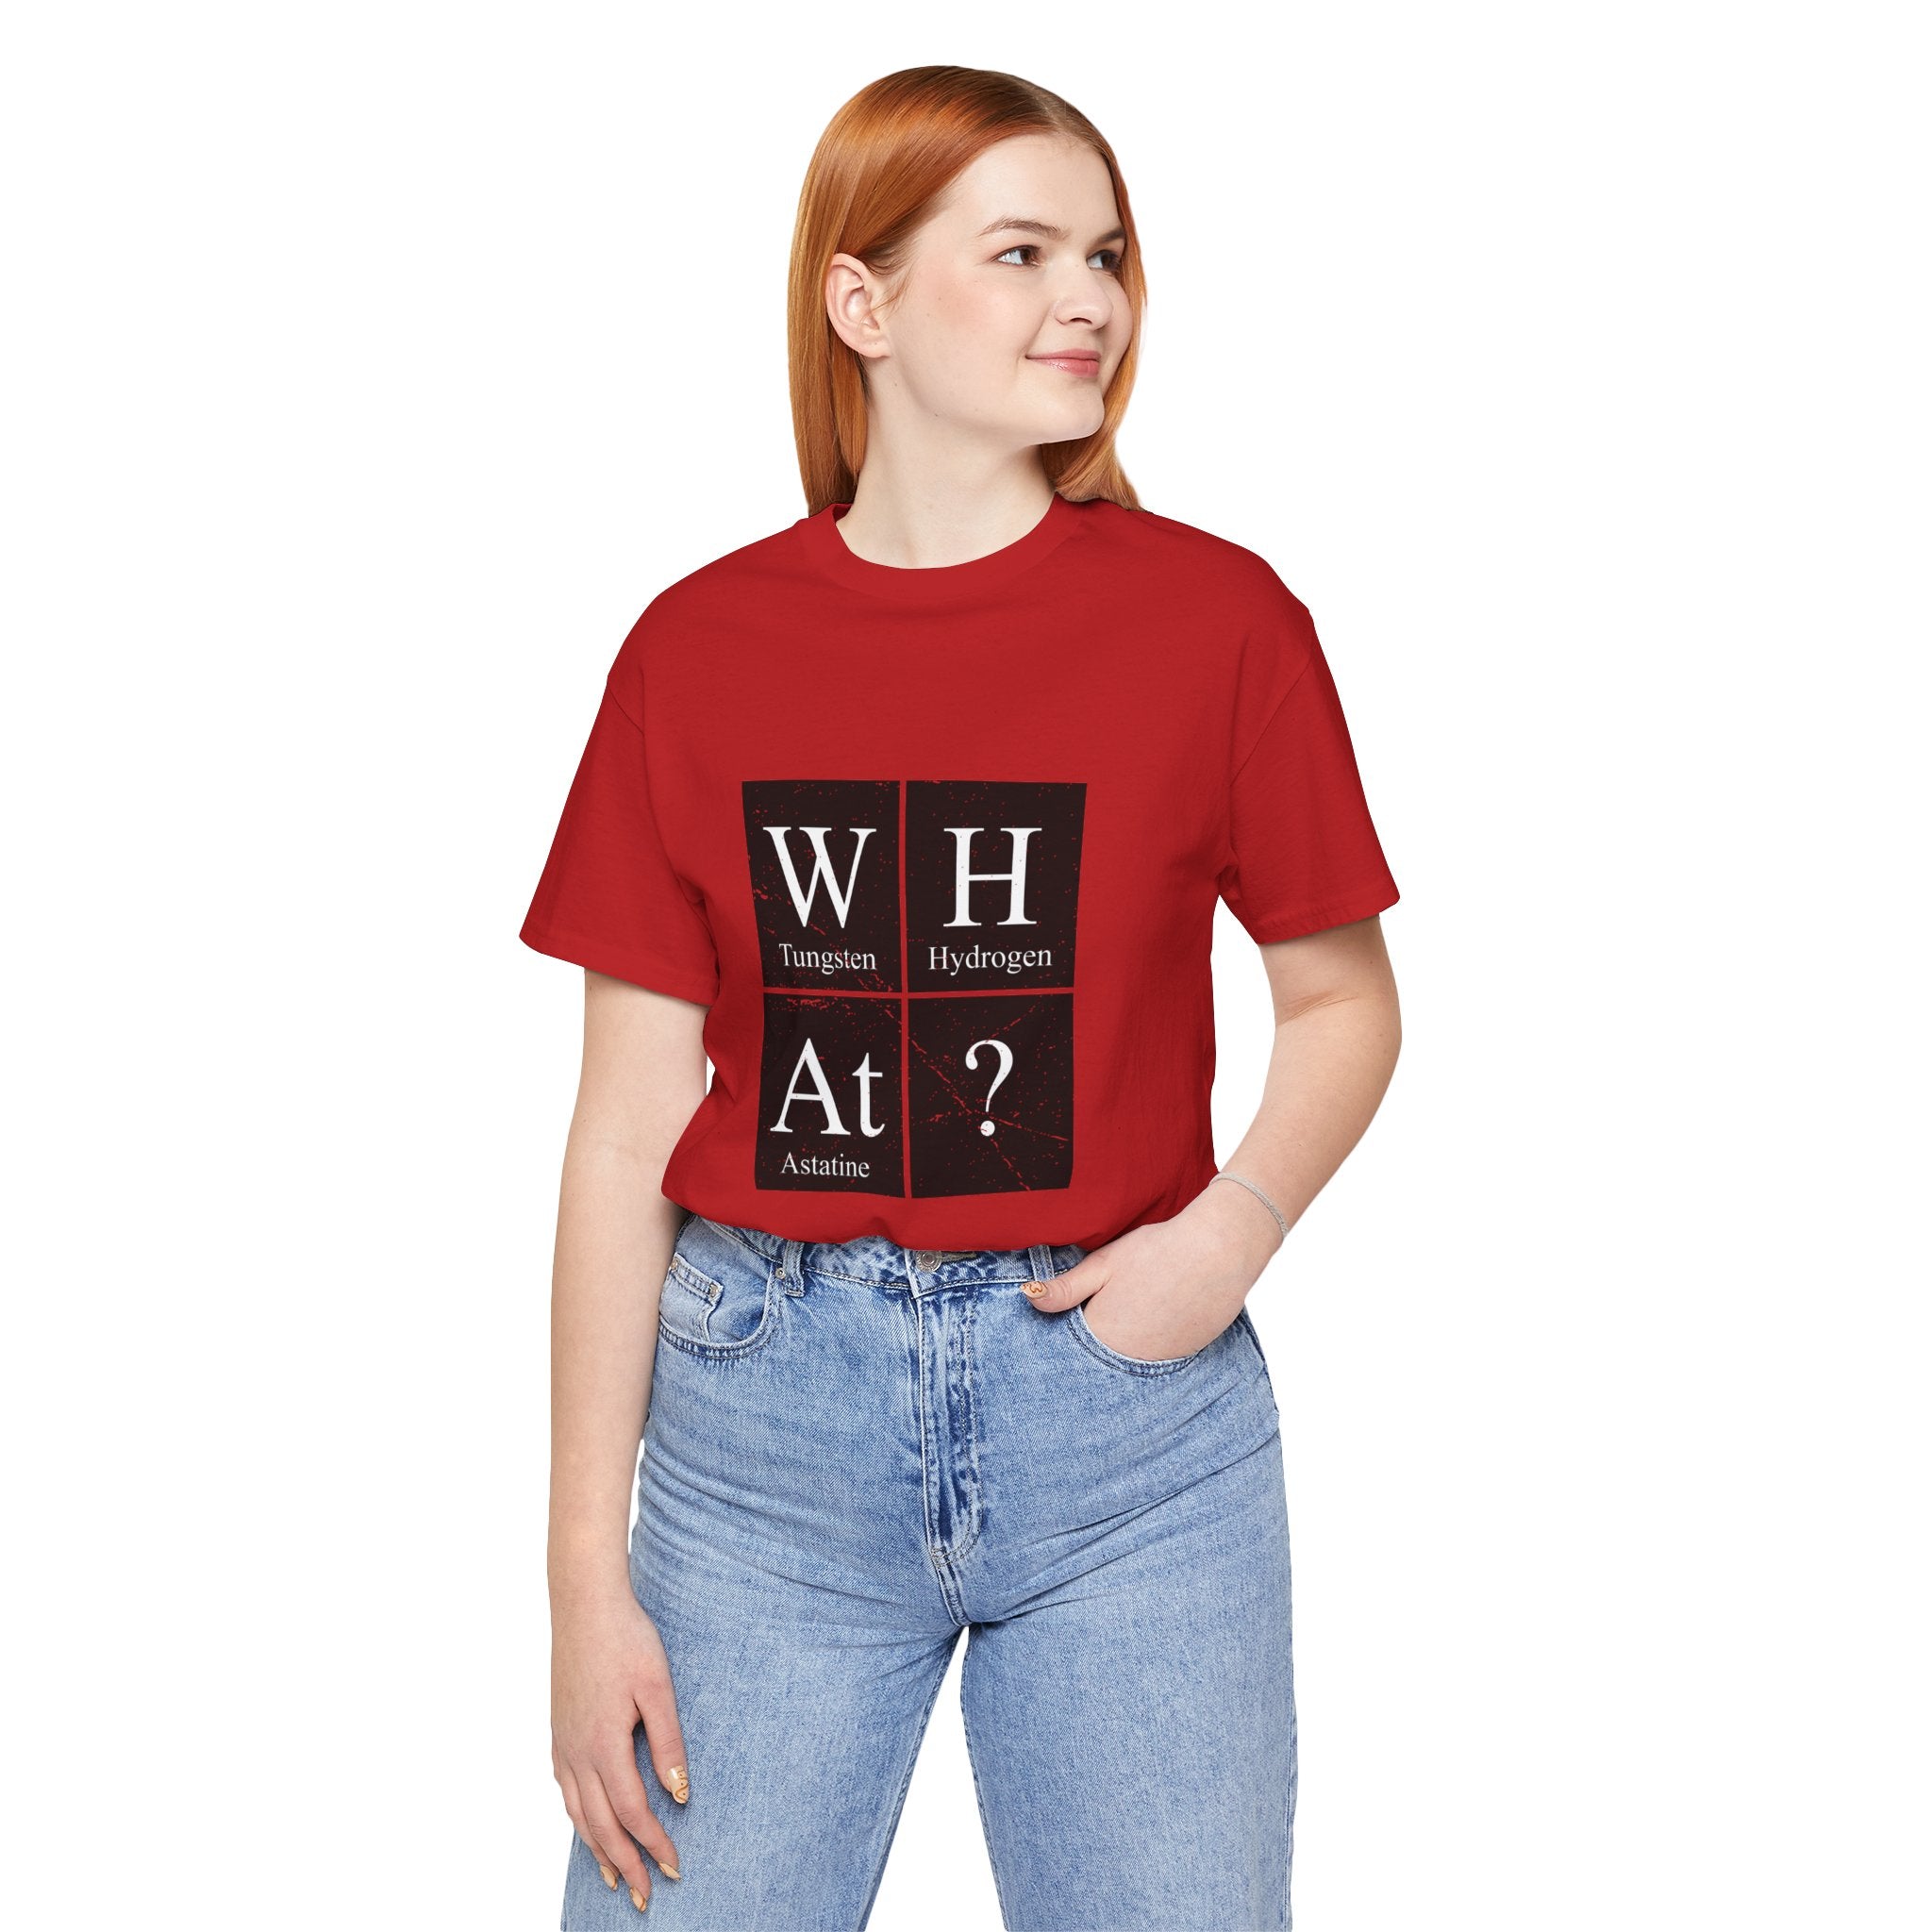 A woman in a red unisex jersey tee with "W-H-At-?" printed on it, pairing it with light blue jeans, stands with hands in pockets, looking to her right.